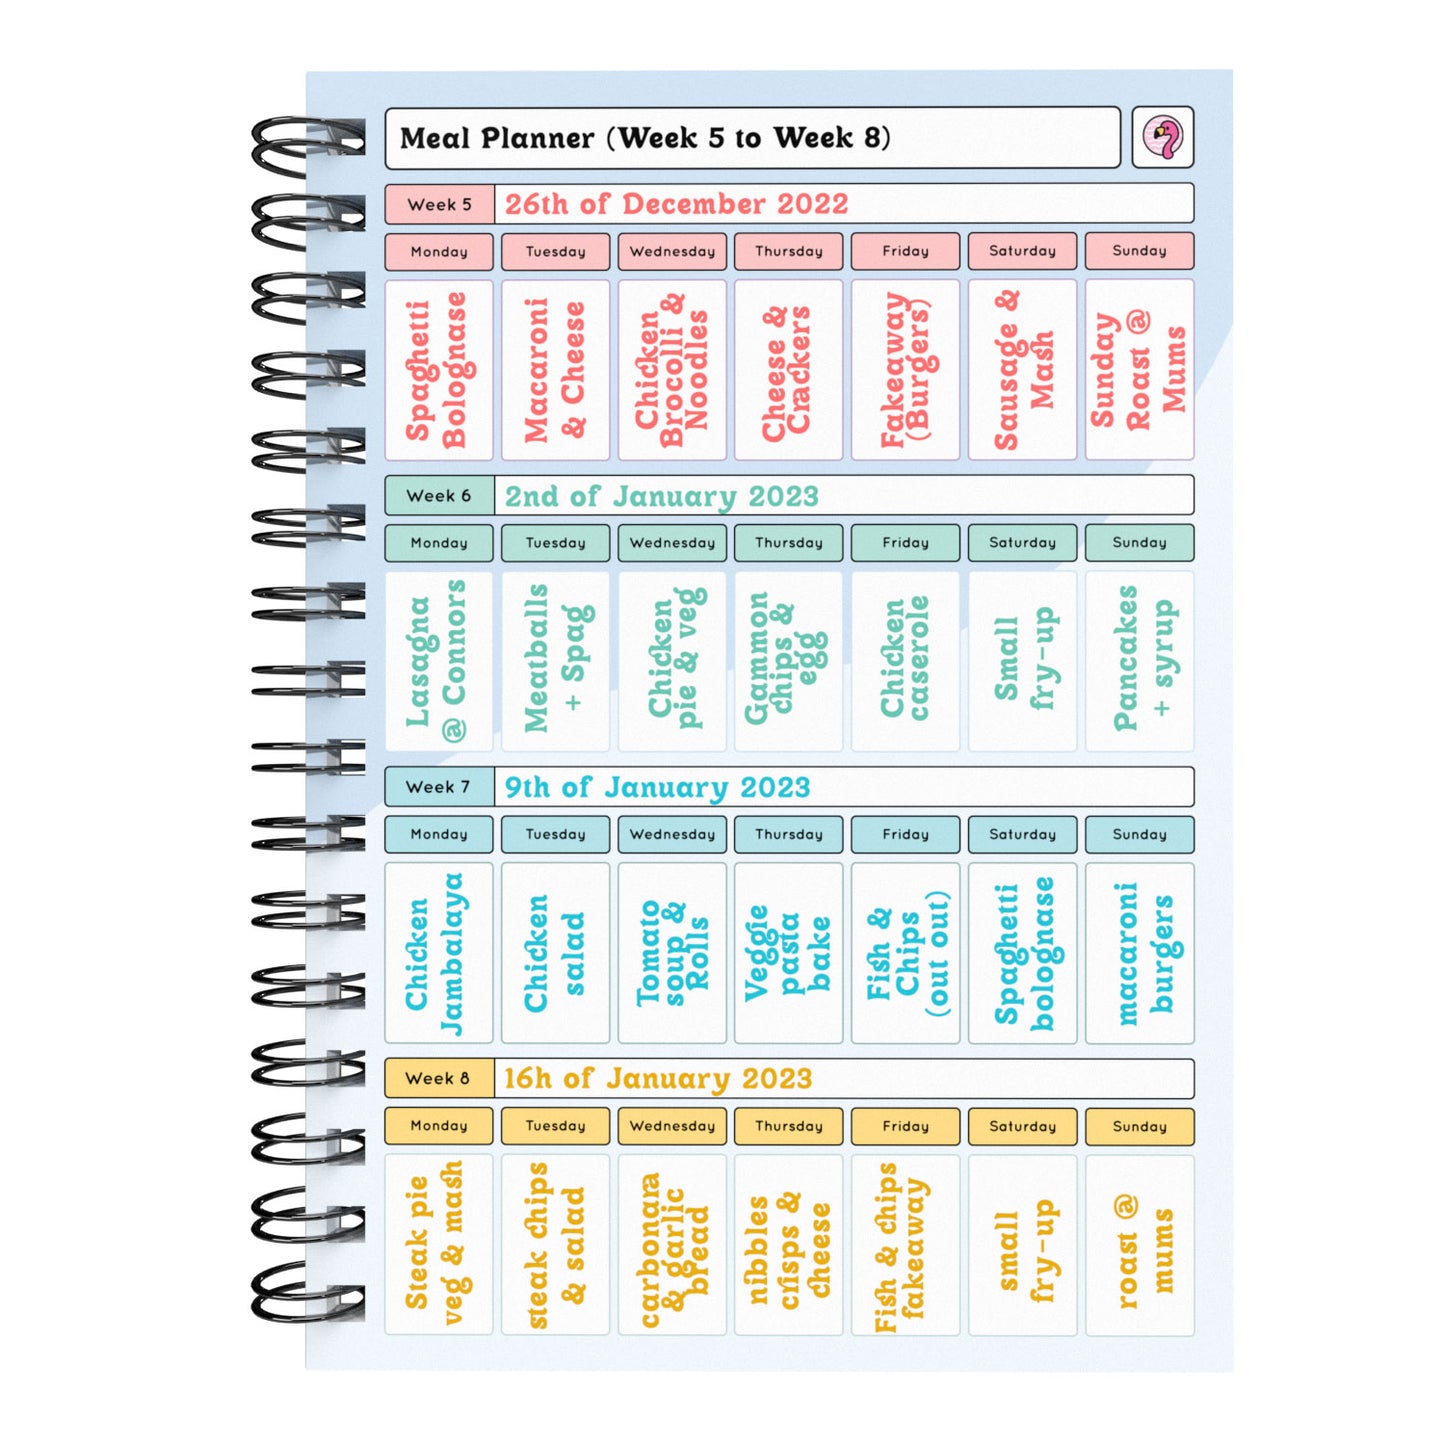 Food Diary - C48 - Calorie Counting